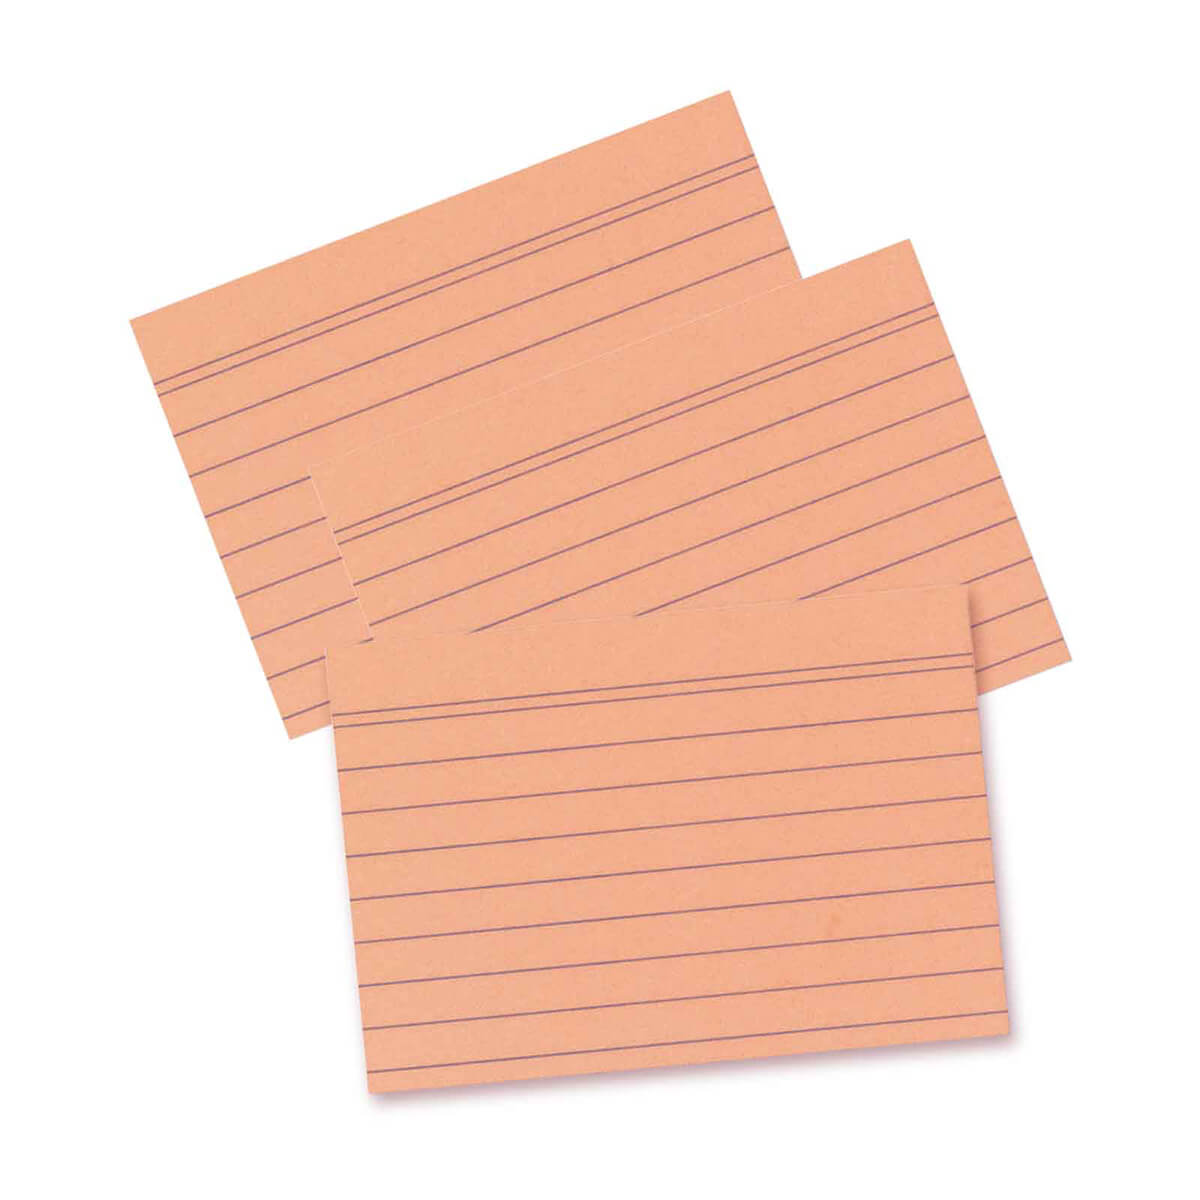 Herlitz Index cards lined 100 pieces shrink-wrapped a6 Orange